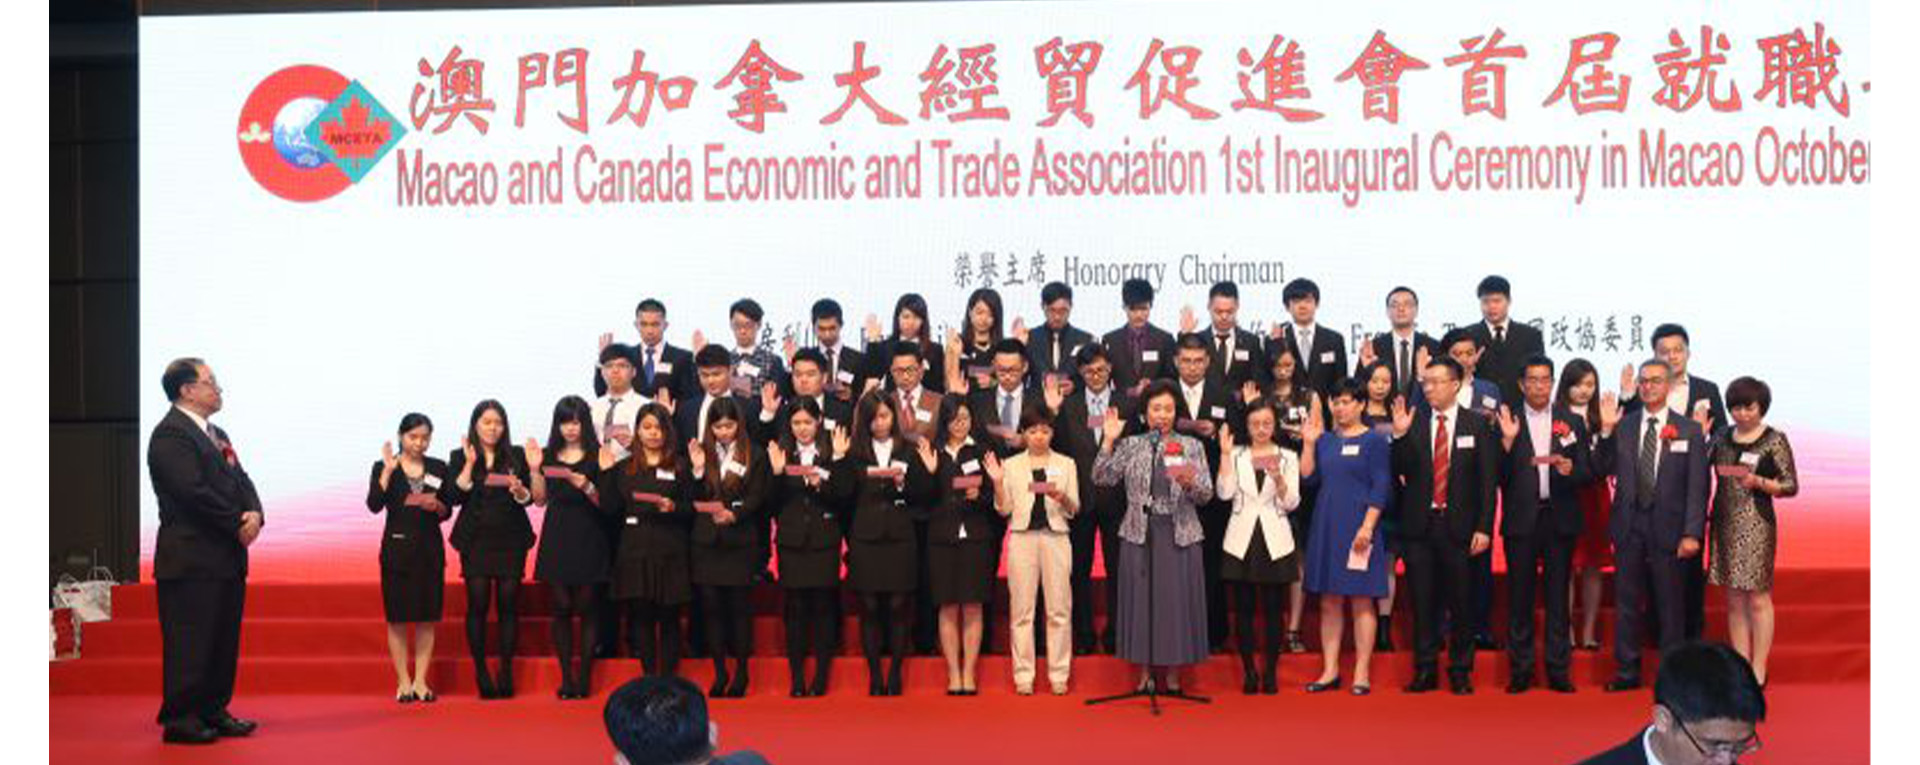 Macao and Canada Economic and Trade Association 1st Inaugural Ceremony in Macao October 23rd, 2015